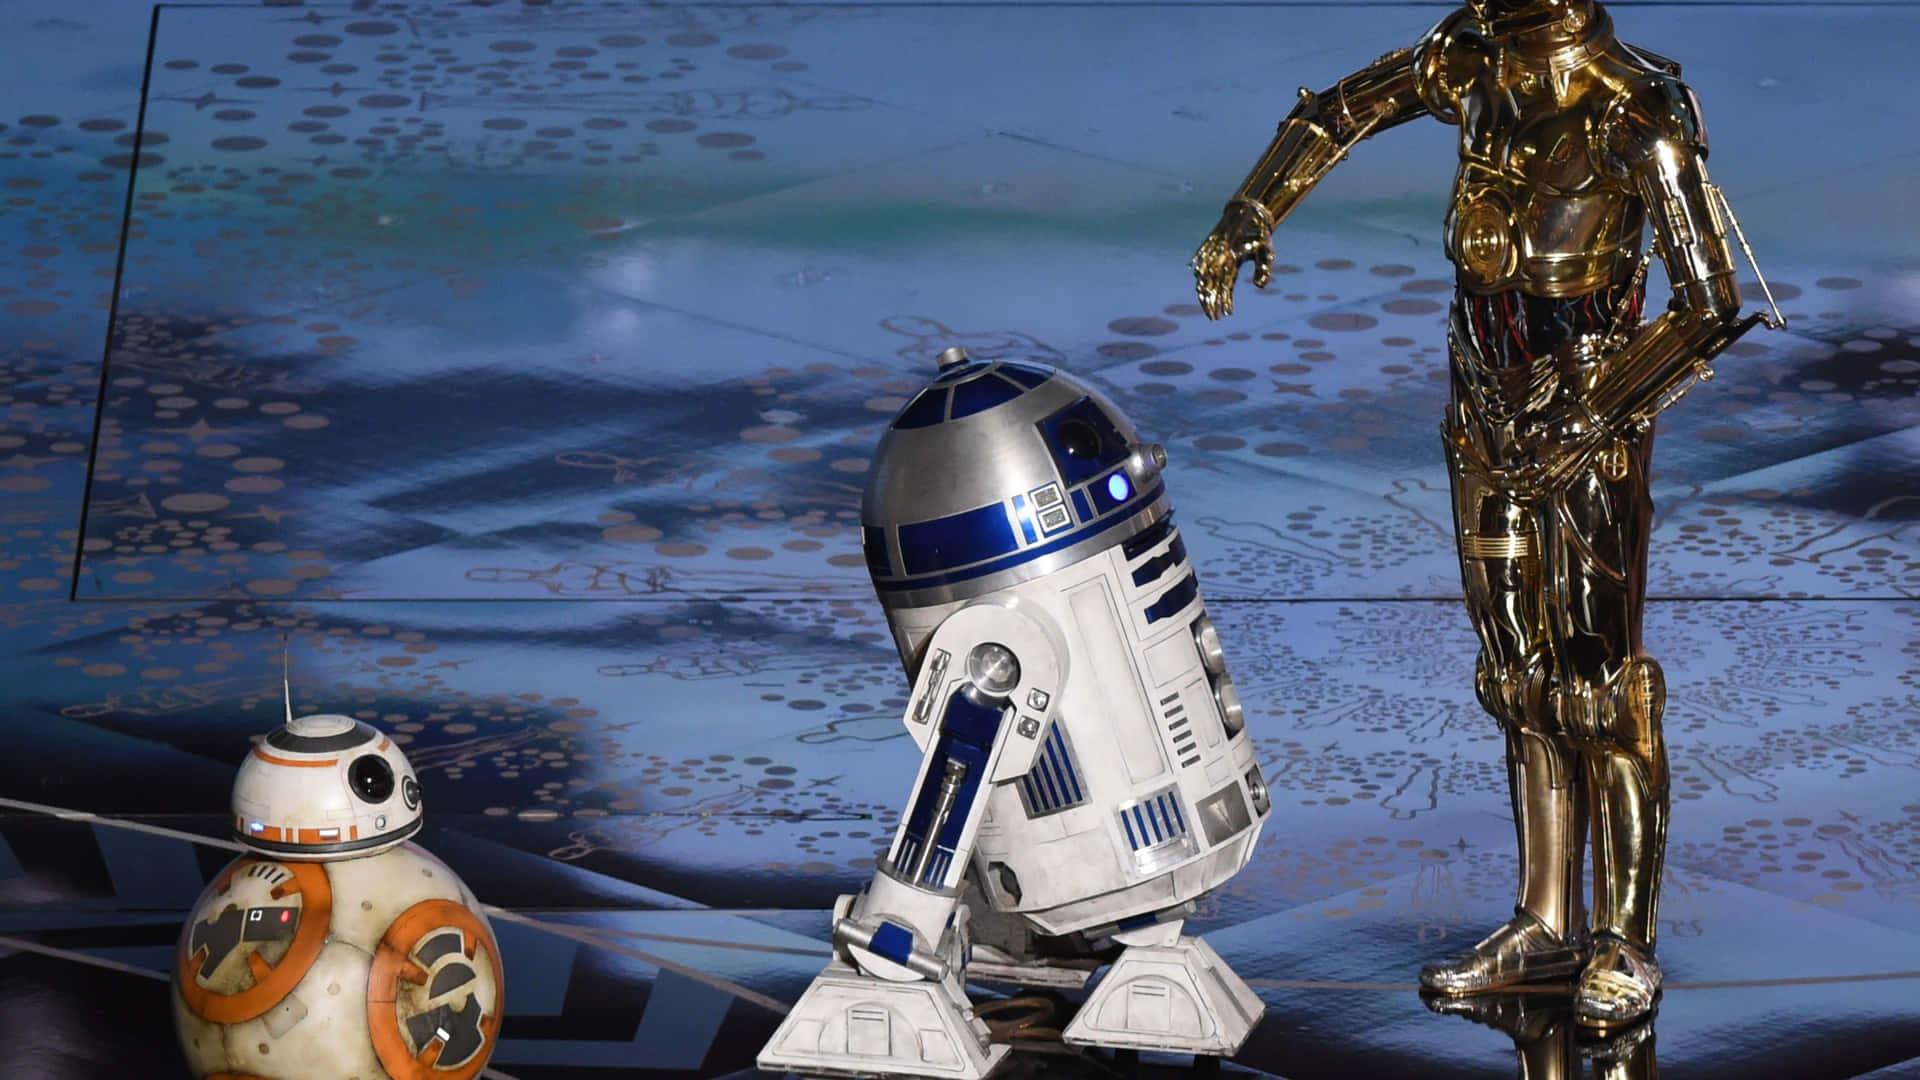 Say Hello to BB-8, the Resistance's feisty droid Wallpaper